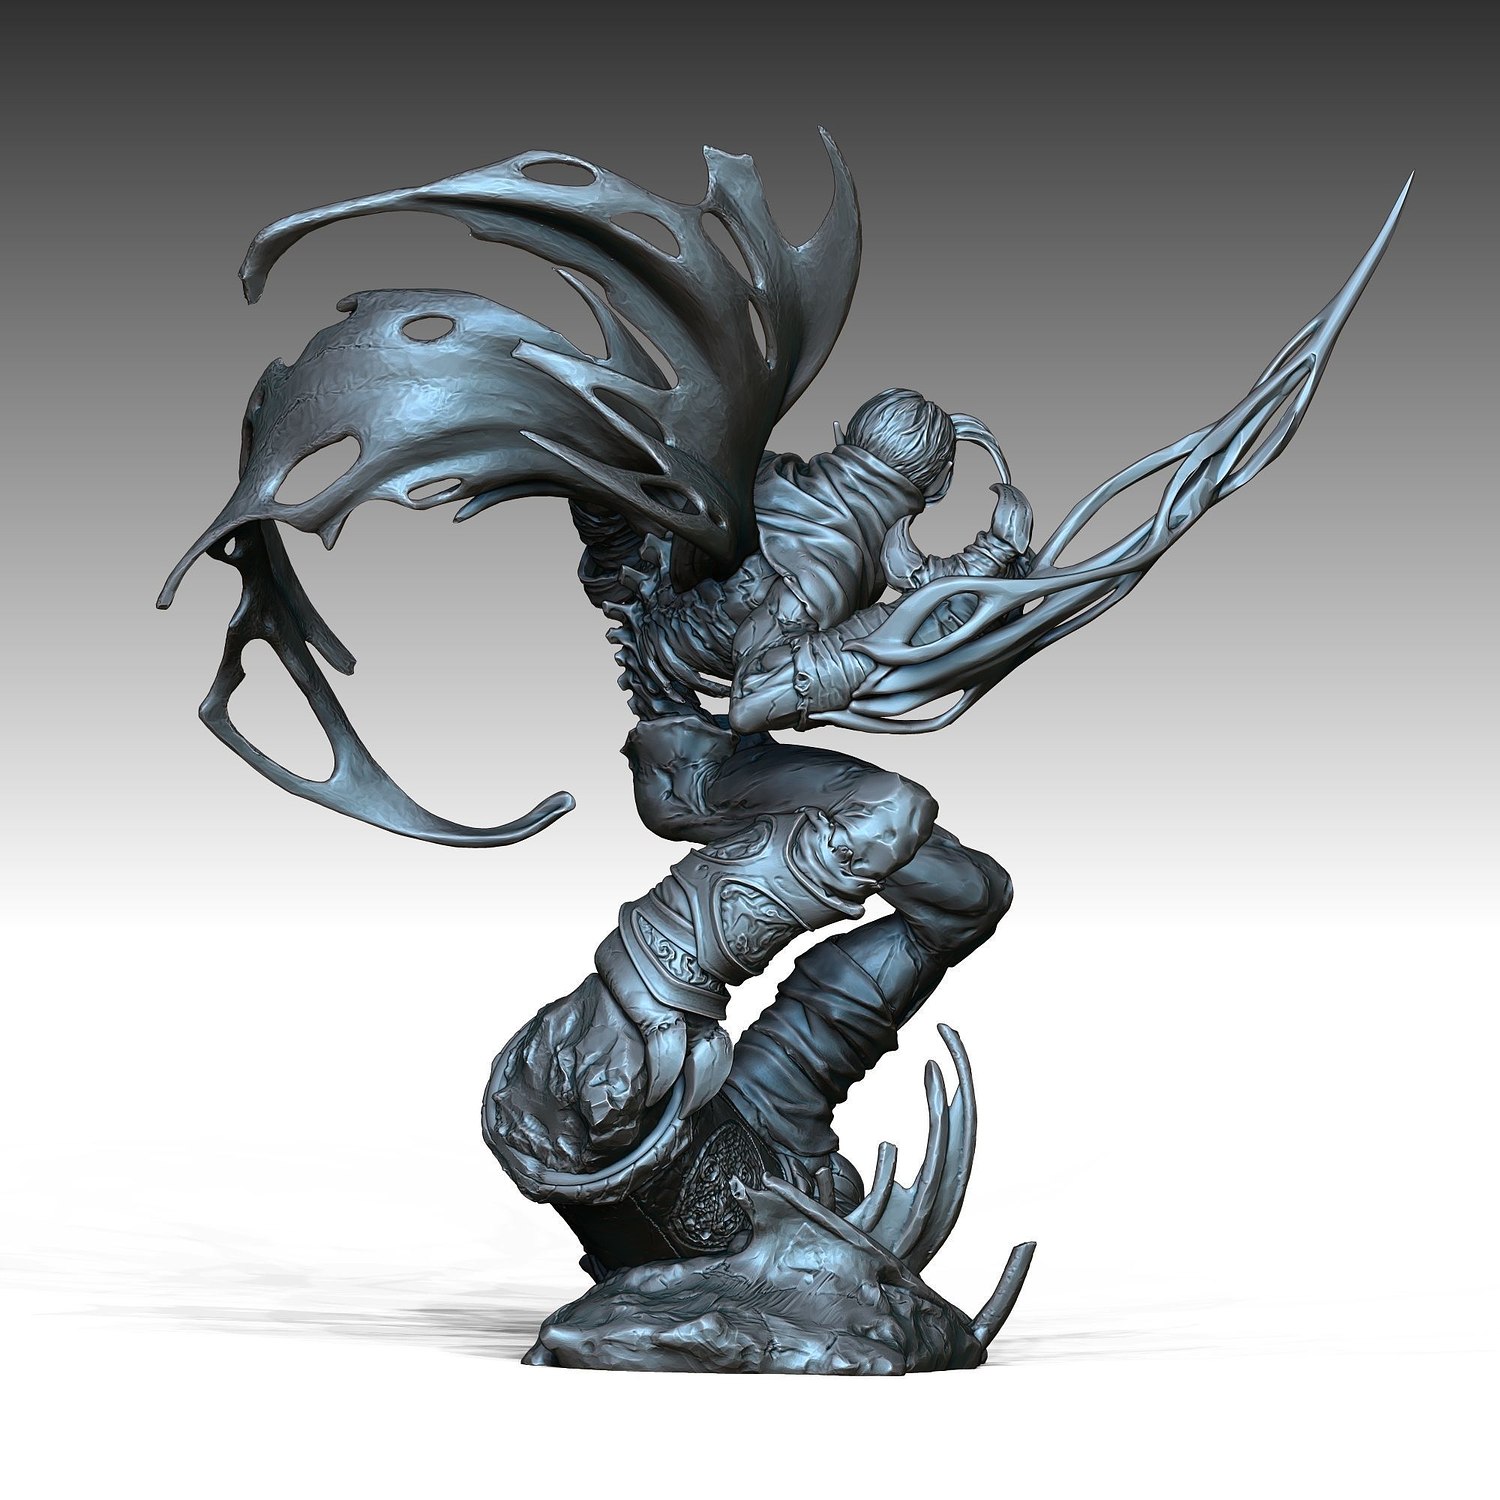 Spirit from Legacy of Kain